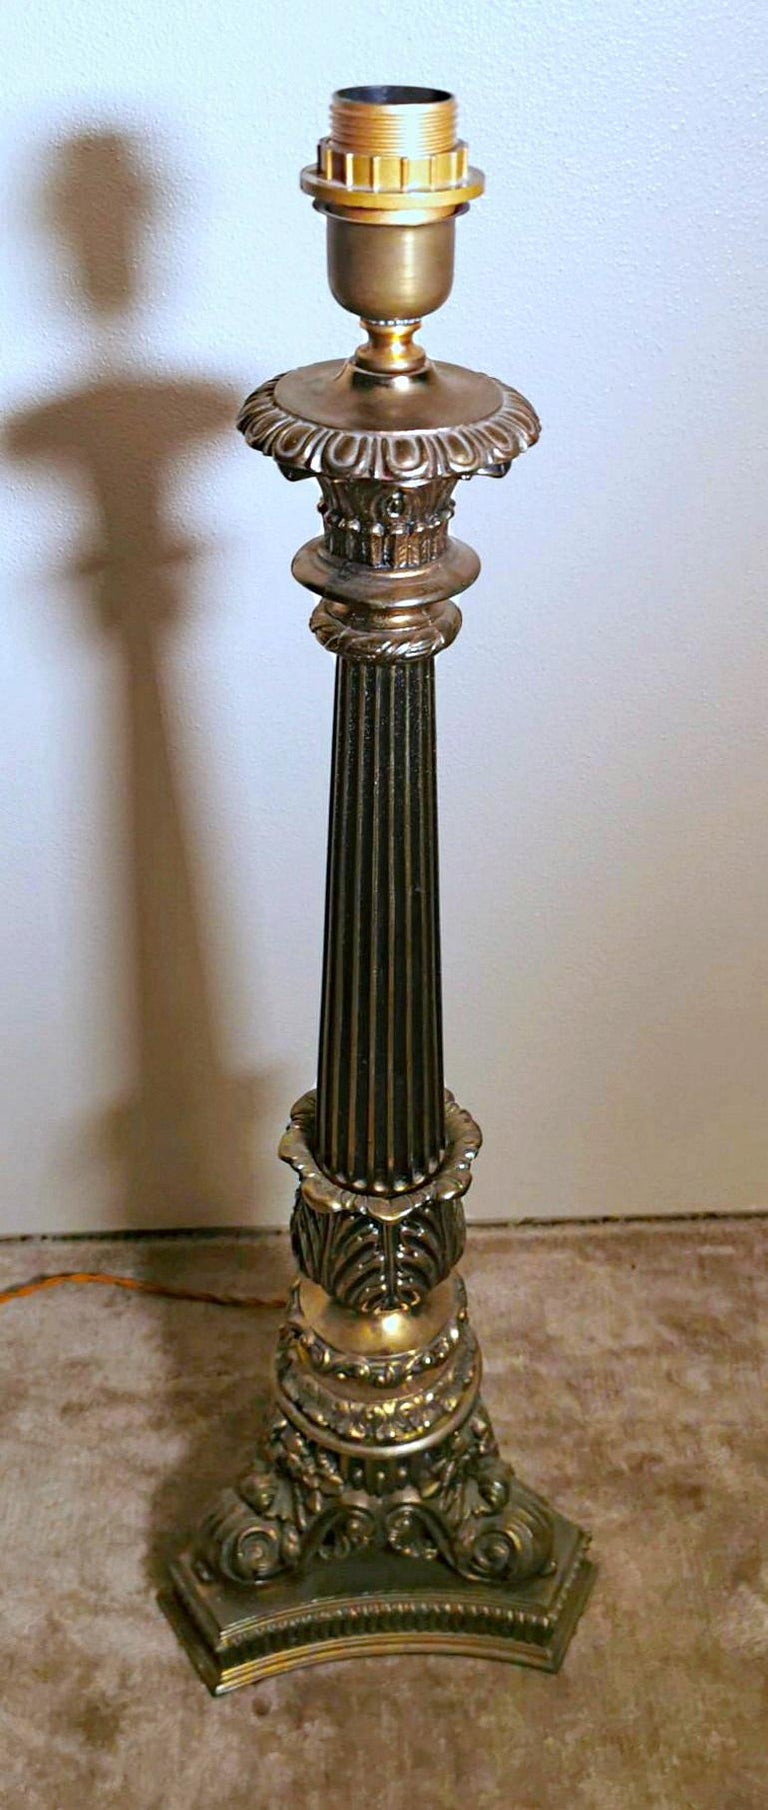 We kindly suggest you read the whole description, because with it we try to give you detailed technical and historical information to guarantee the authenticity of our objects.
Massive and heavy Empire-style candlestick, electrified to function as a